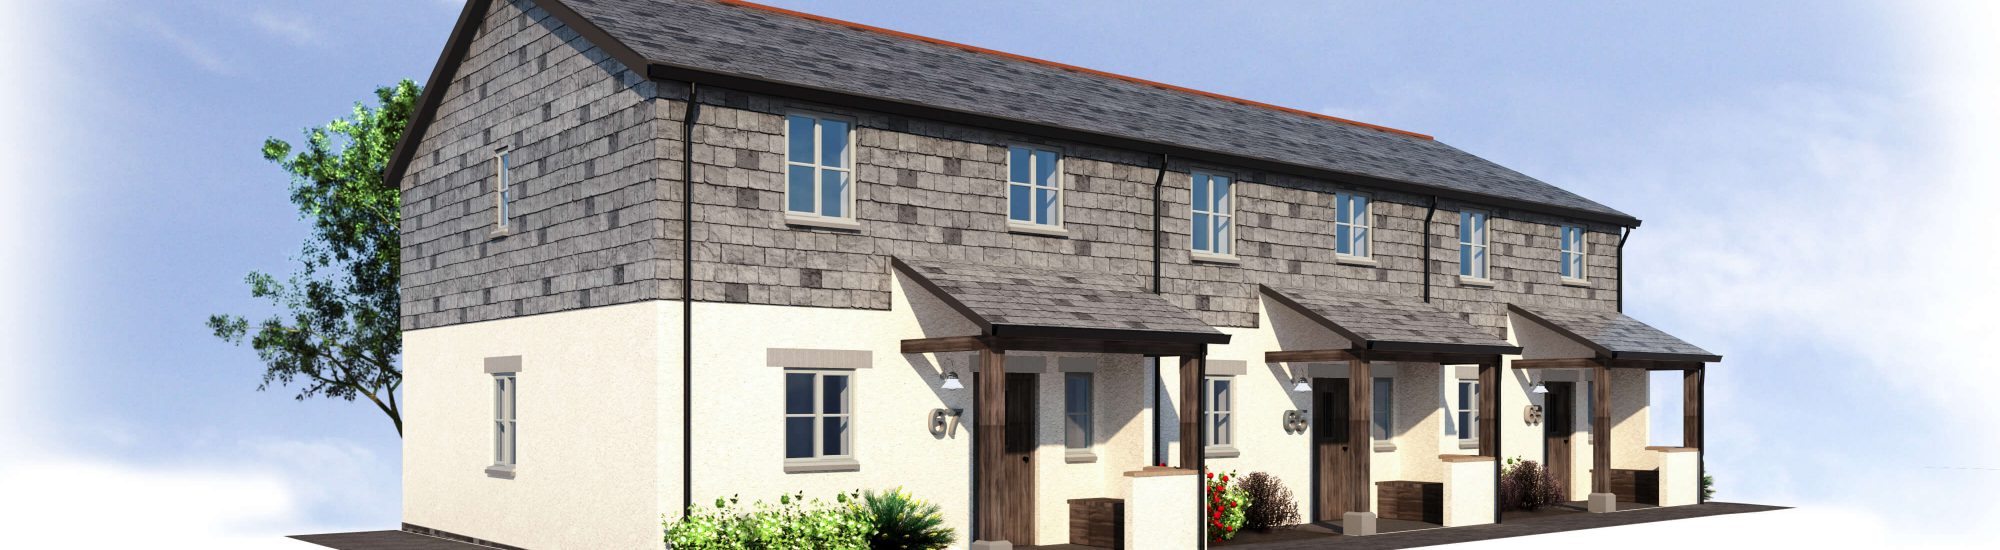 2b4p Open Market Traditional 2000x550 - Hedhas Dowr, Trevemper, Newquay